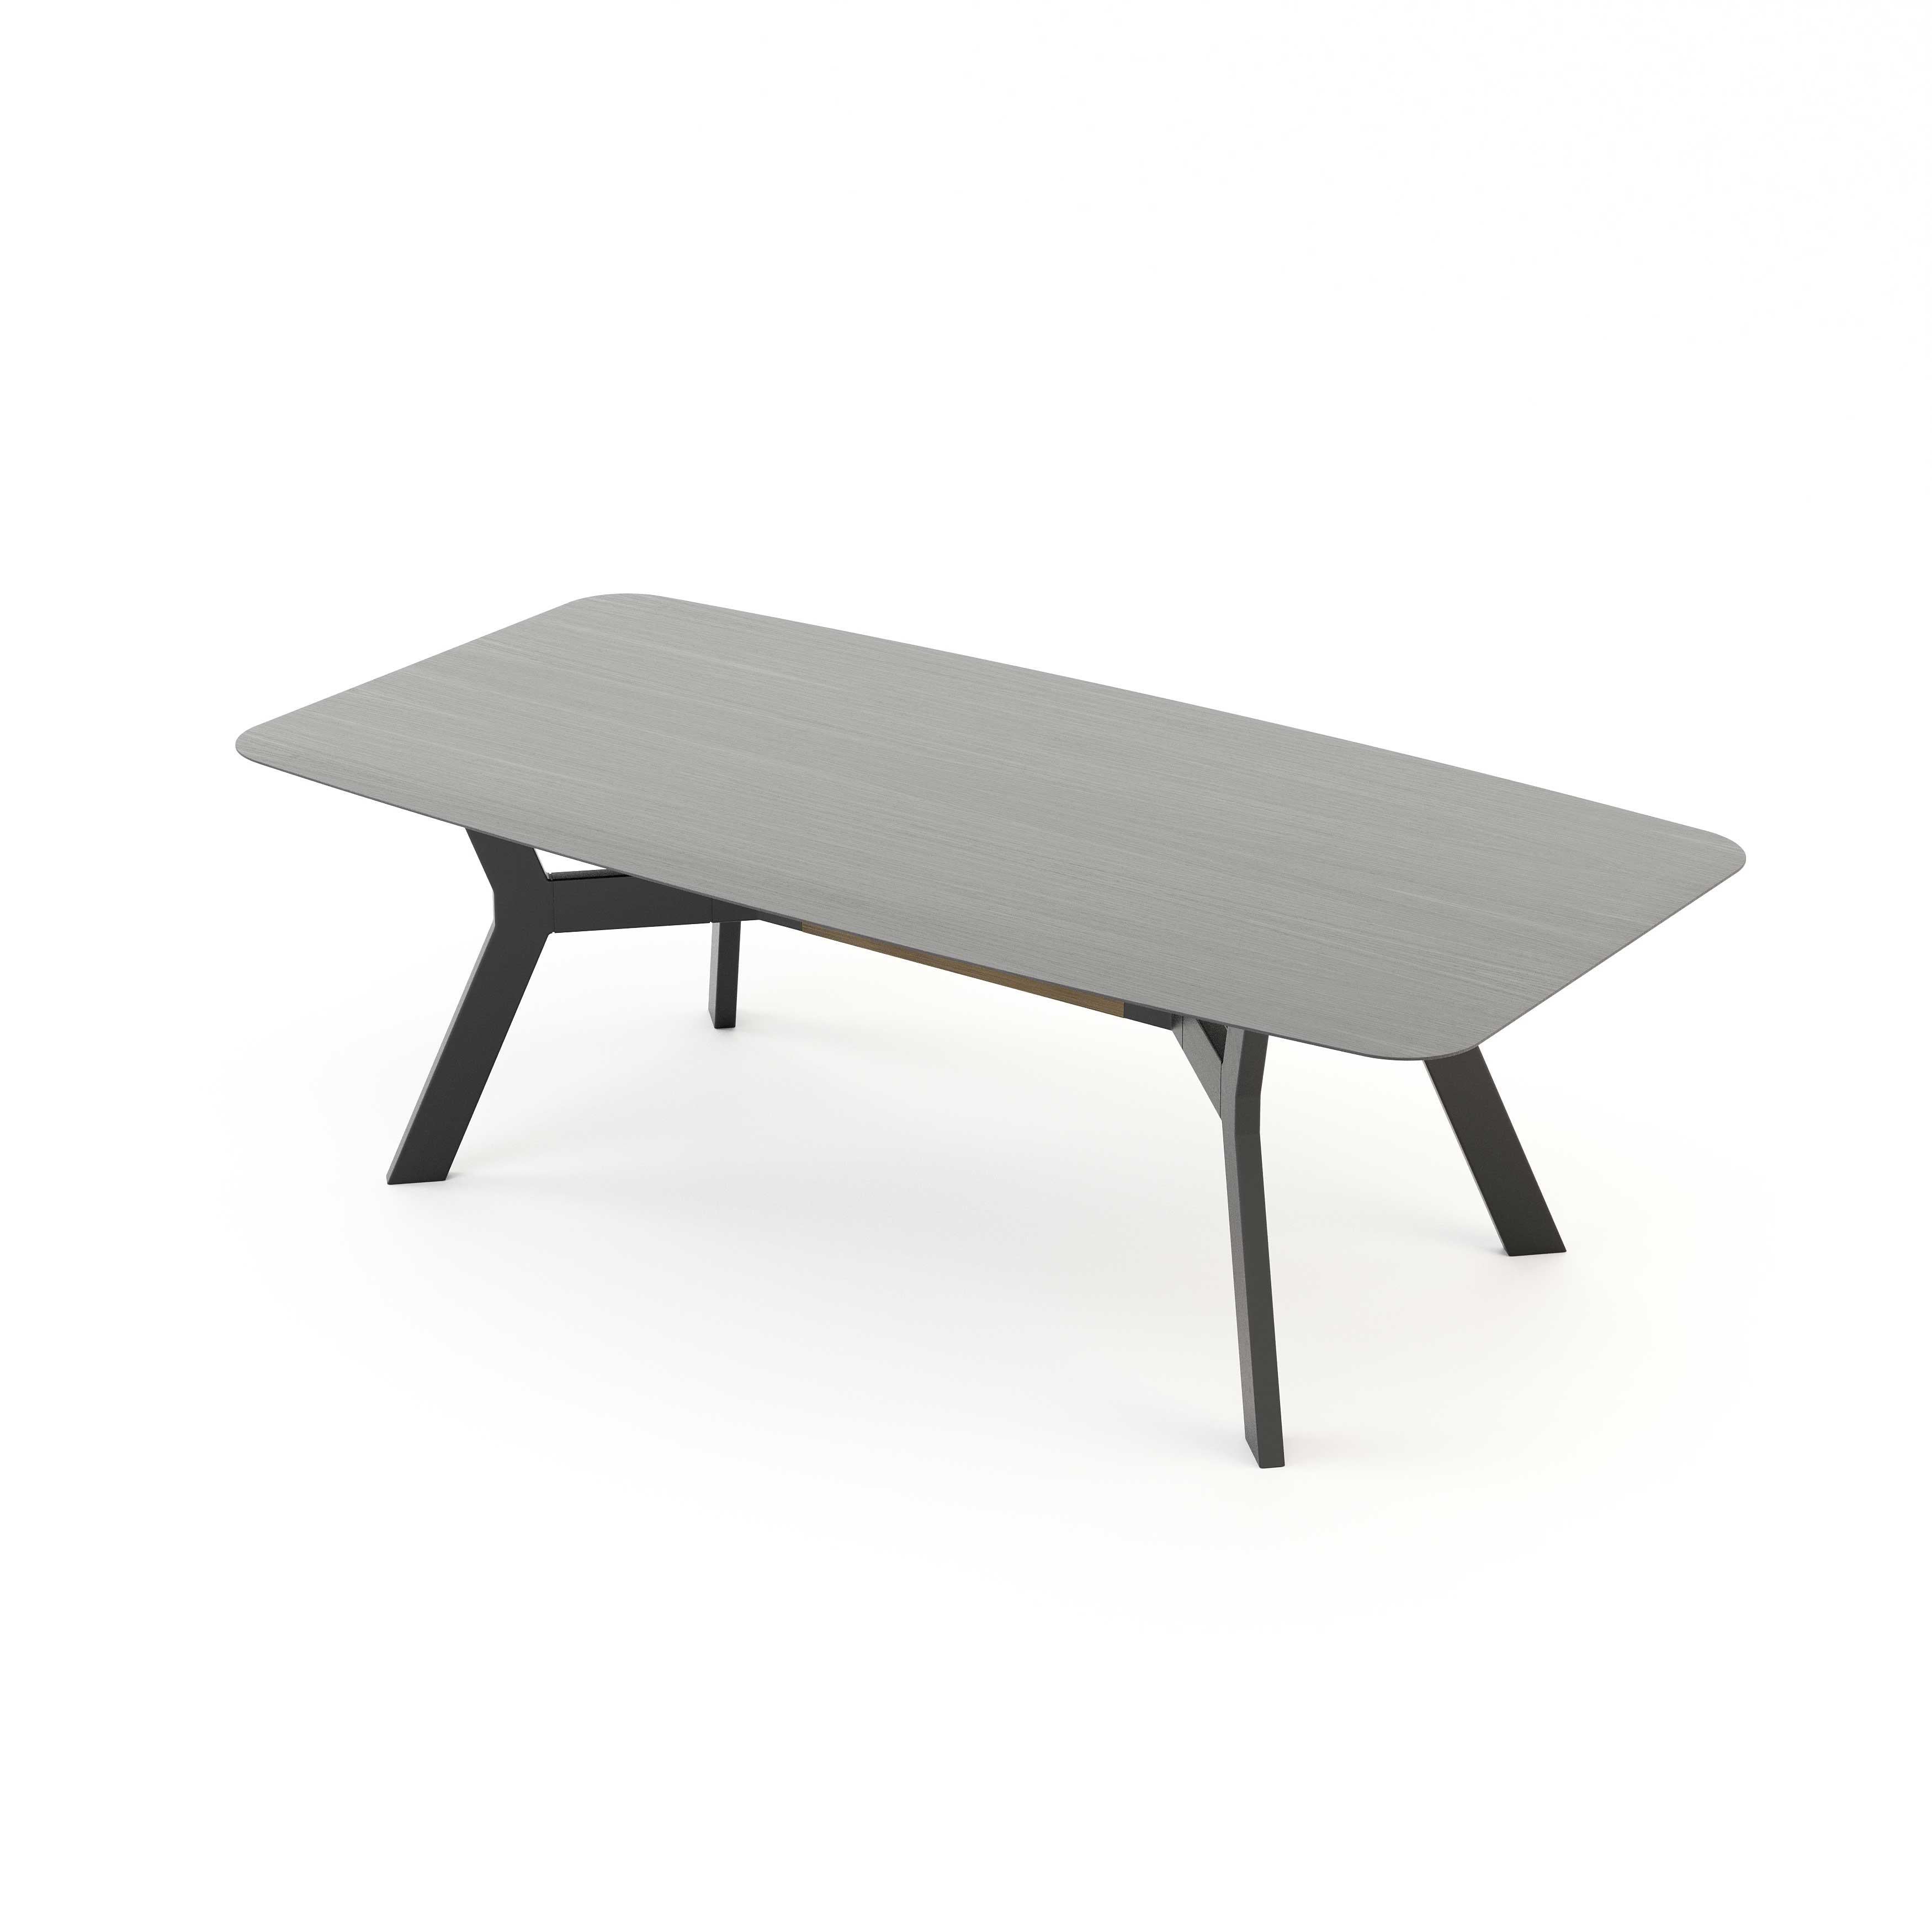 Portuguese Modern Rectangular Toro Dining Table Made with Oak and Bronze, Handmade For Sale